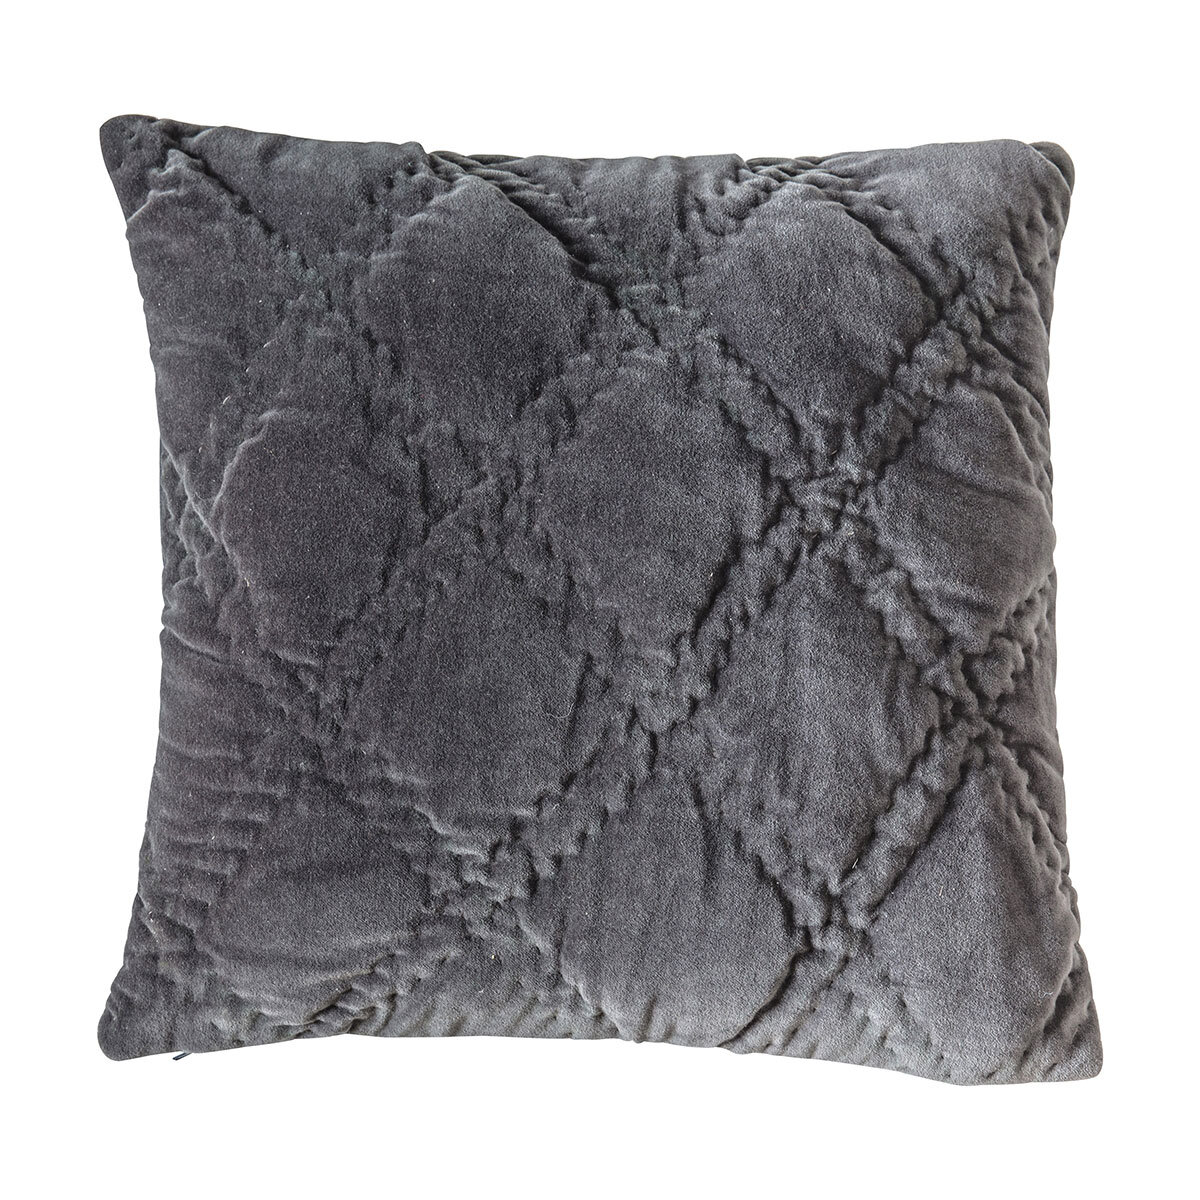 Gallery Quilted Cotton Velvet Cushion in 4 Colours, 45 x 45 cm